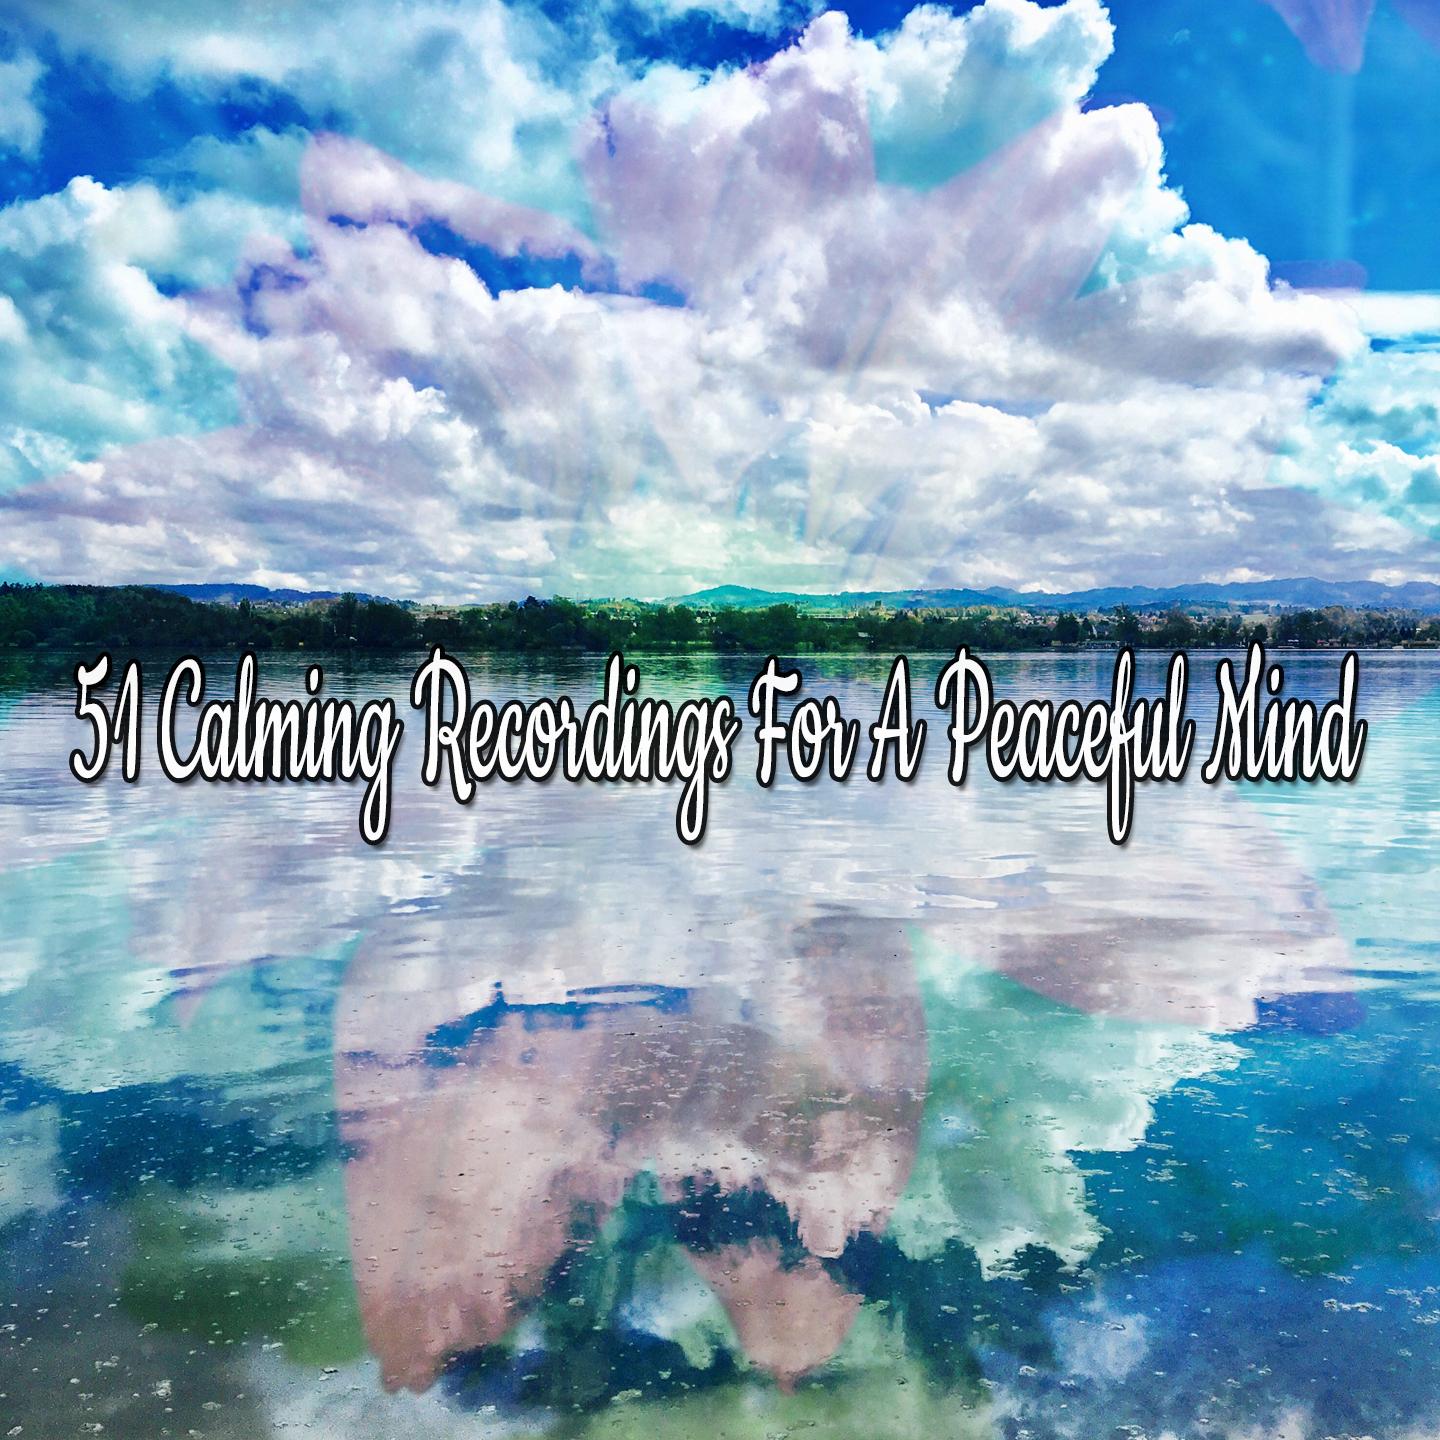 51 Calming Recordings For A Peaceful Mind